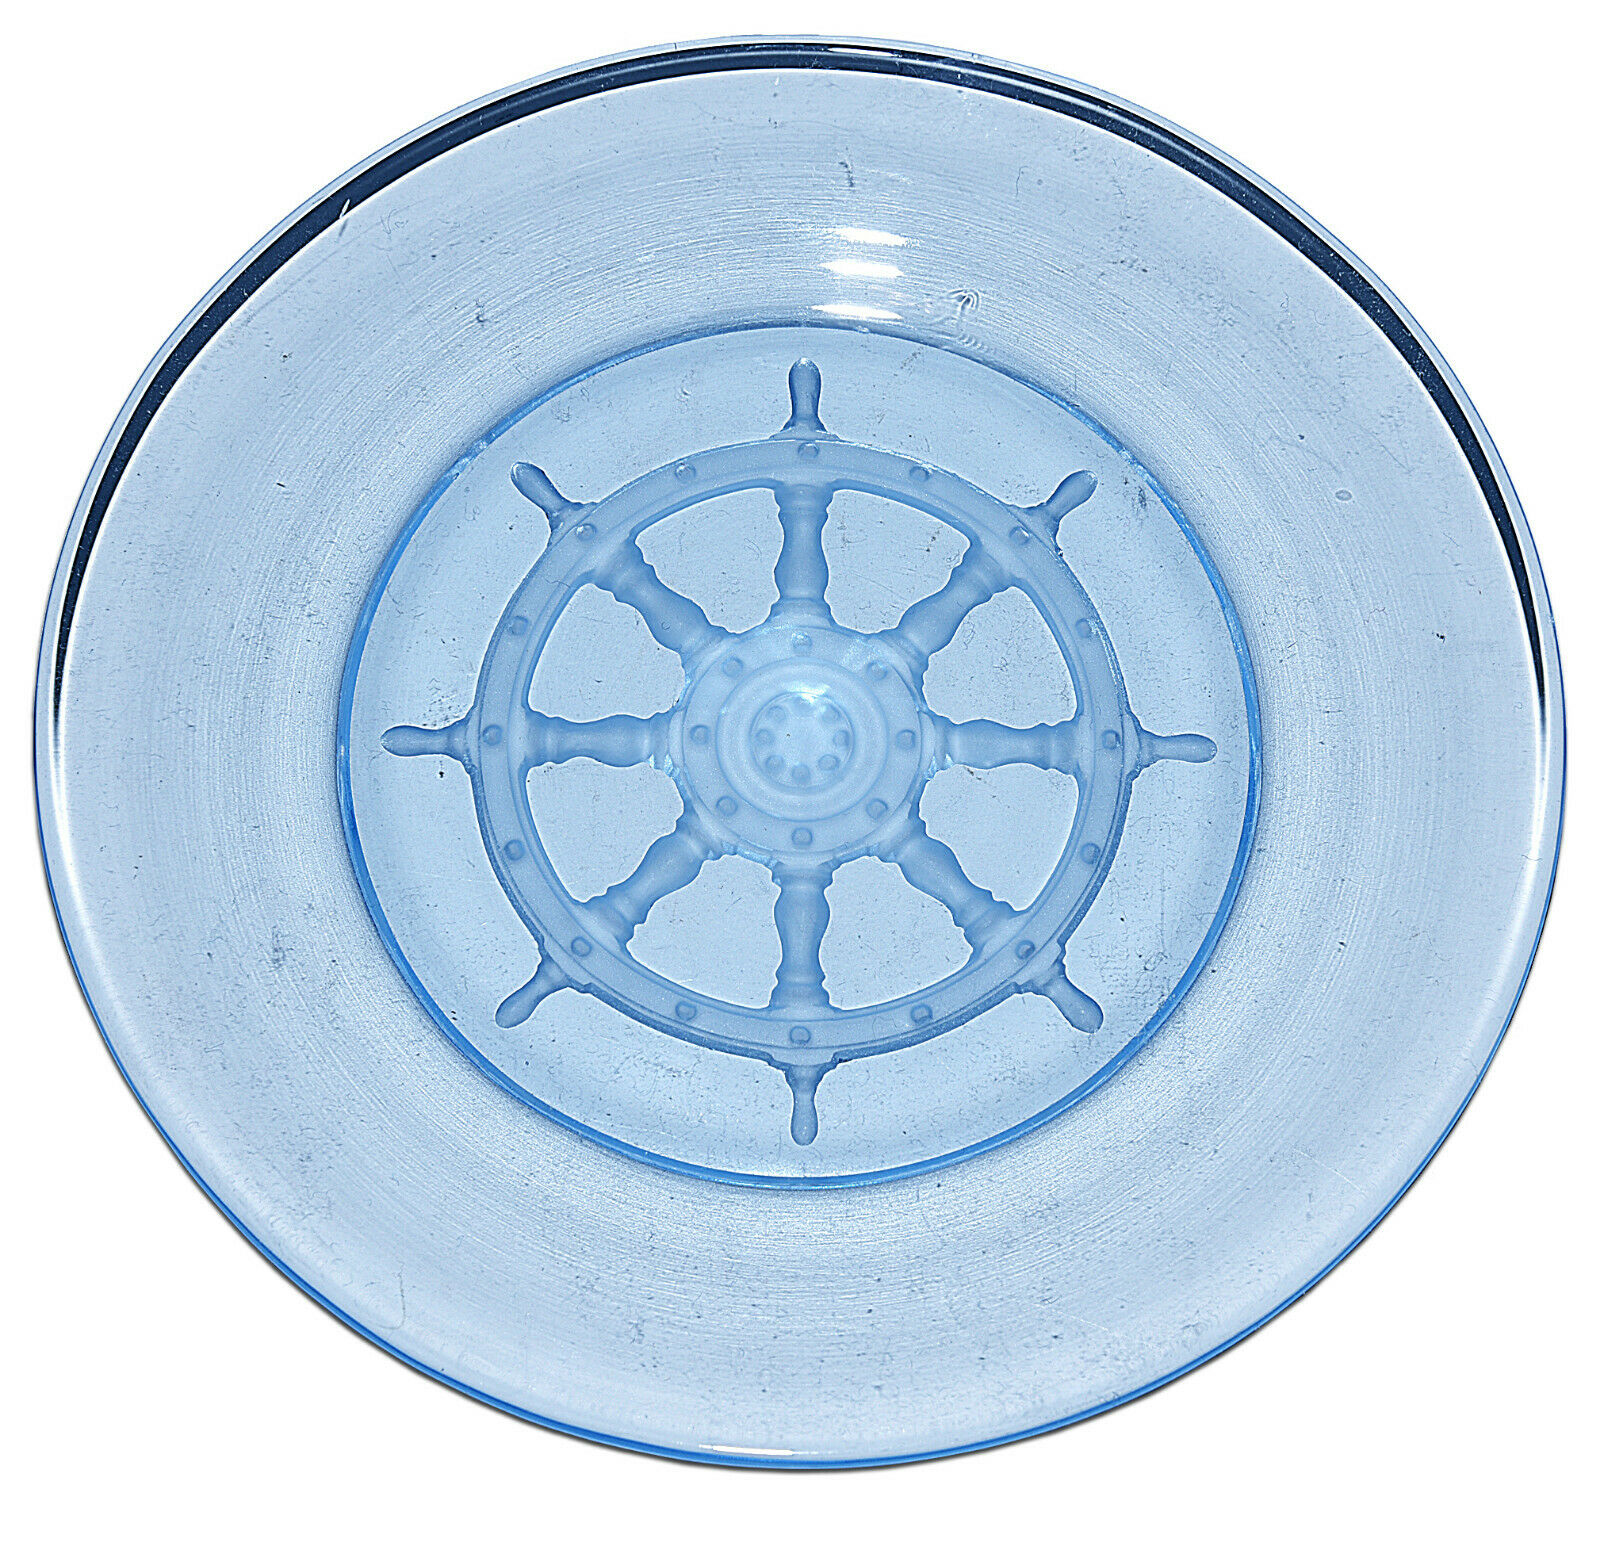 Duncan and Miller Nautical Blue Bread and Butter Plate